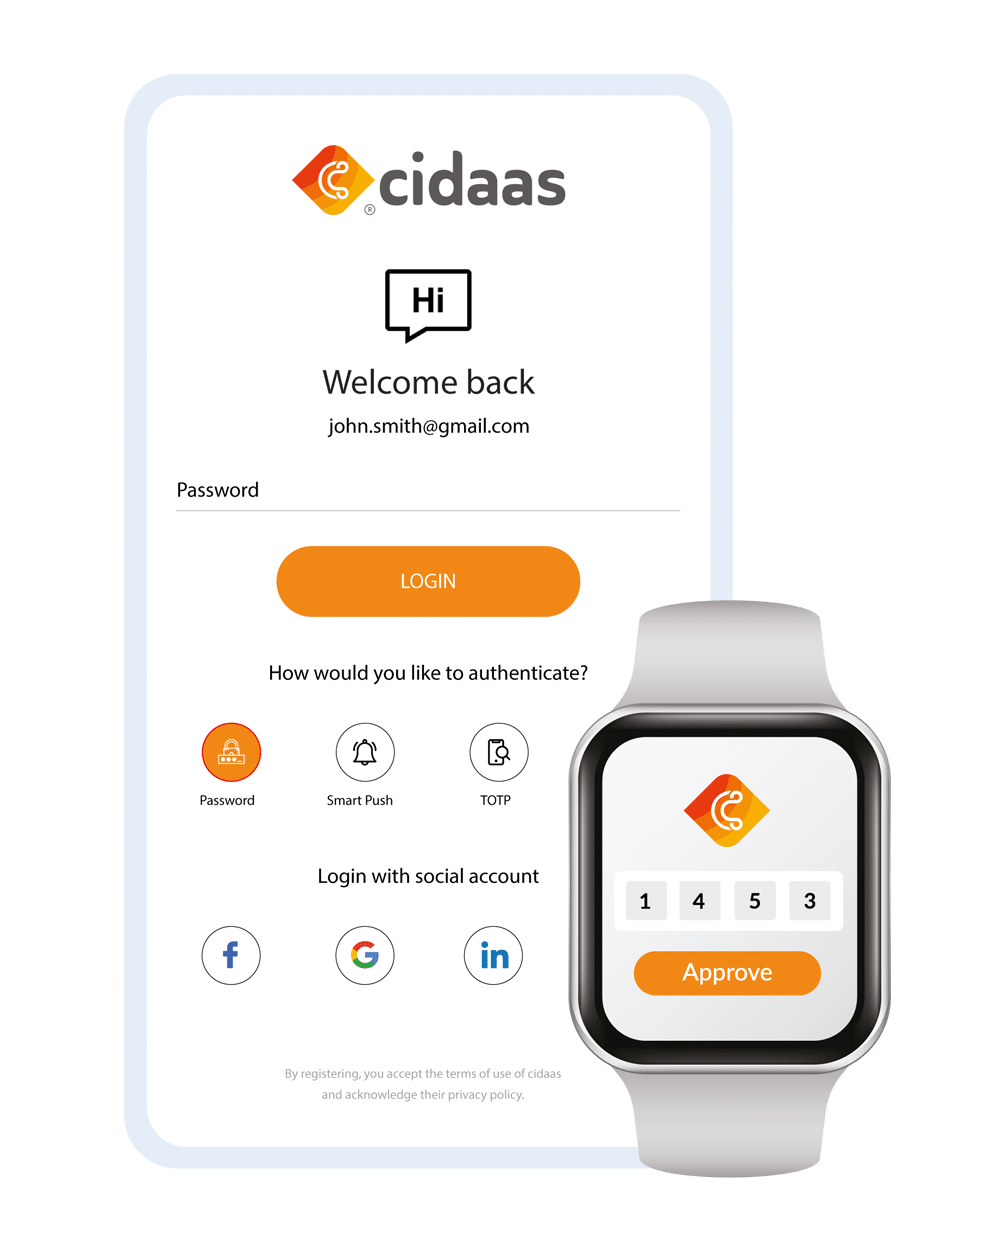 Integrate with SDKs by cidaas with just a few lines of code in any application - be it JavaScript, Swift or PHP!